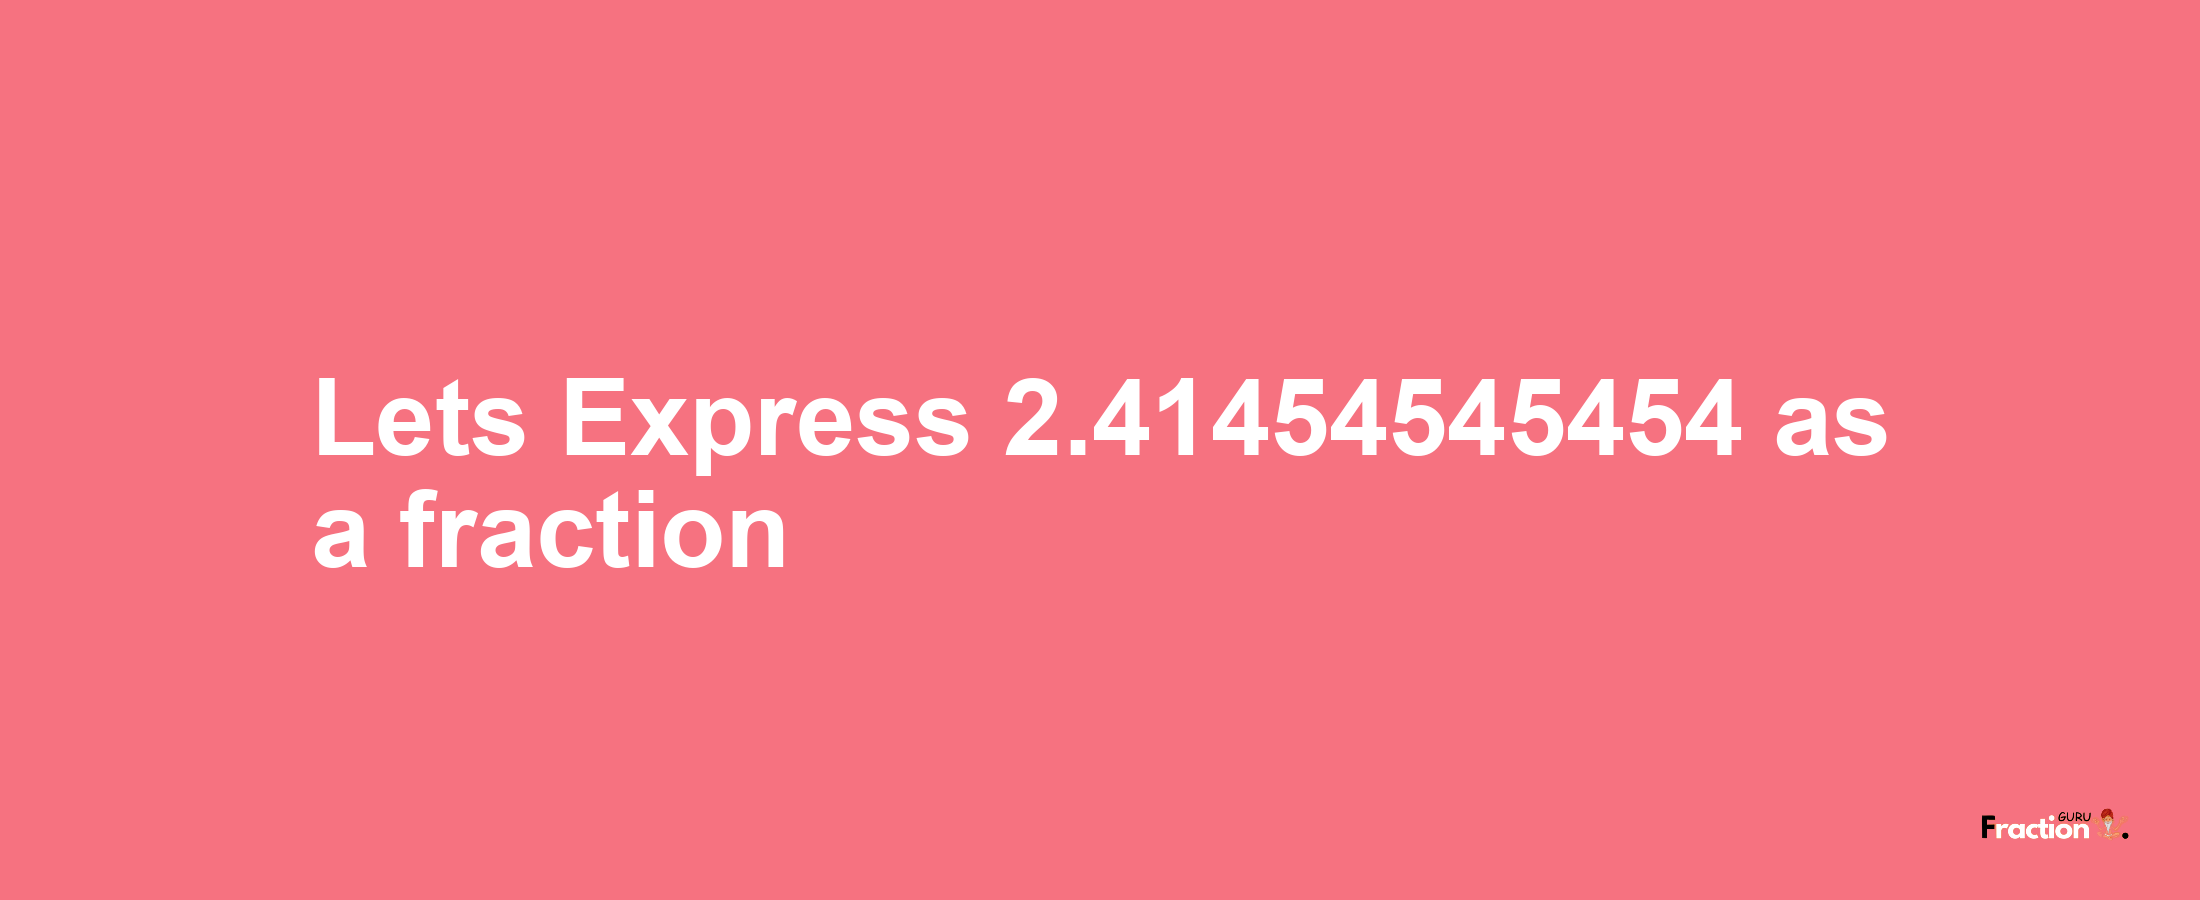 Lets Express 2.41454545454 as afraction